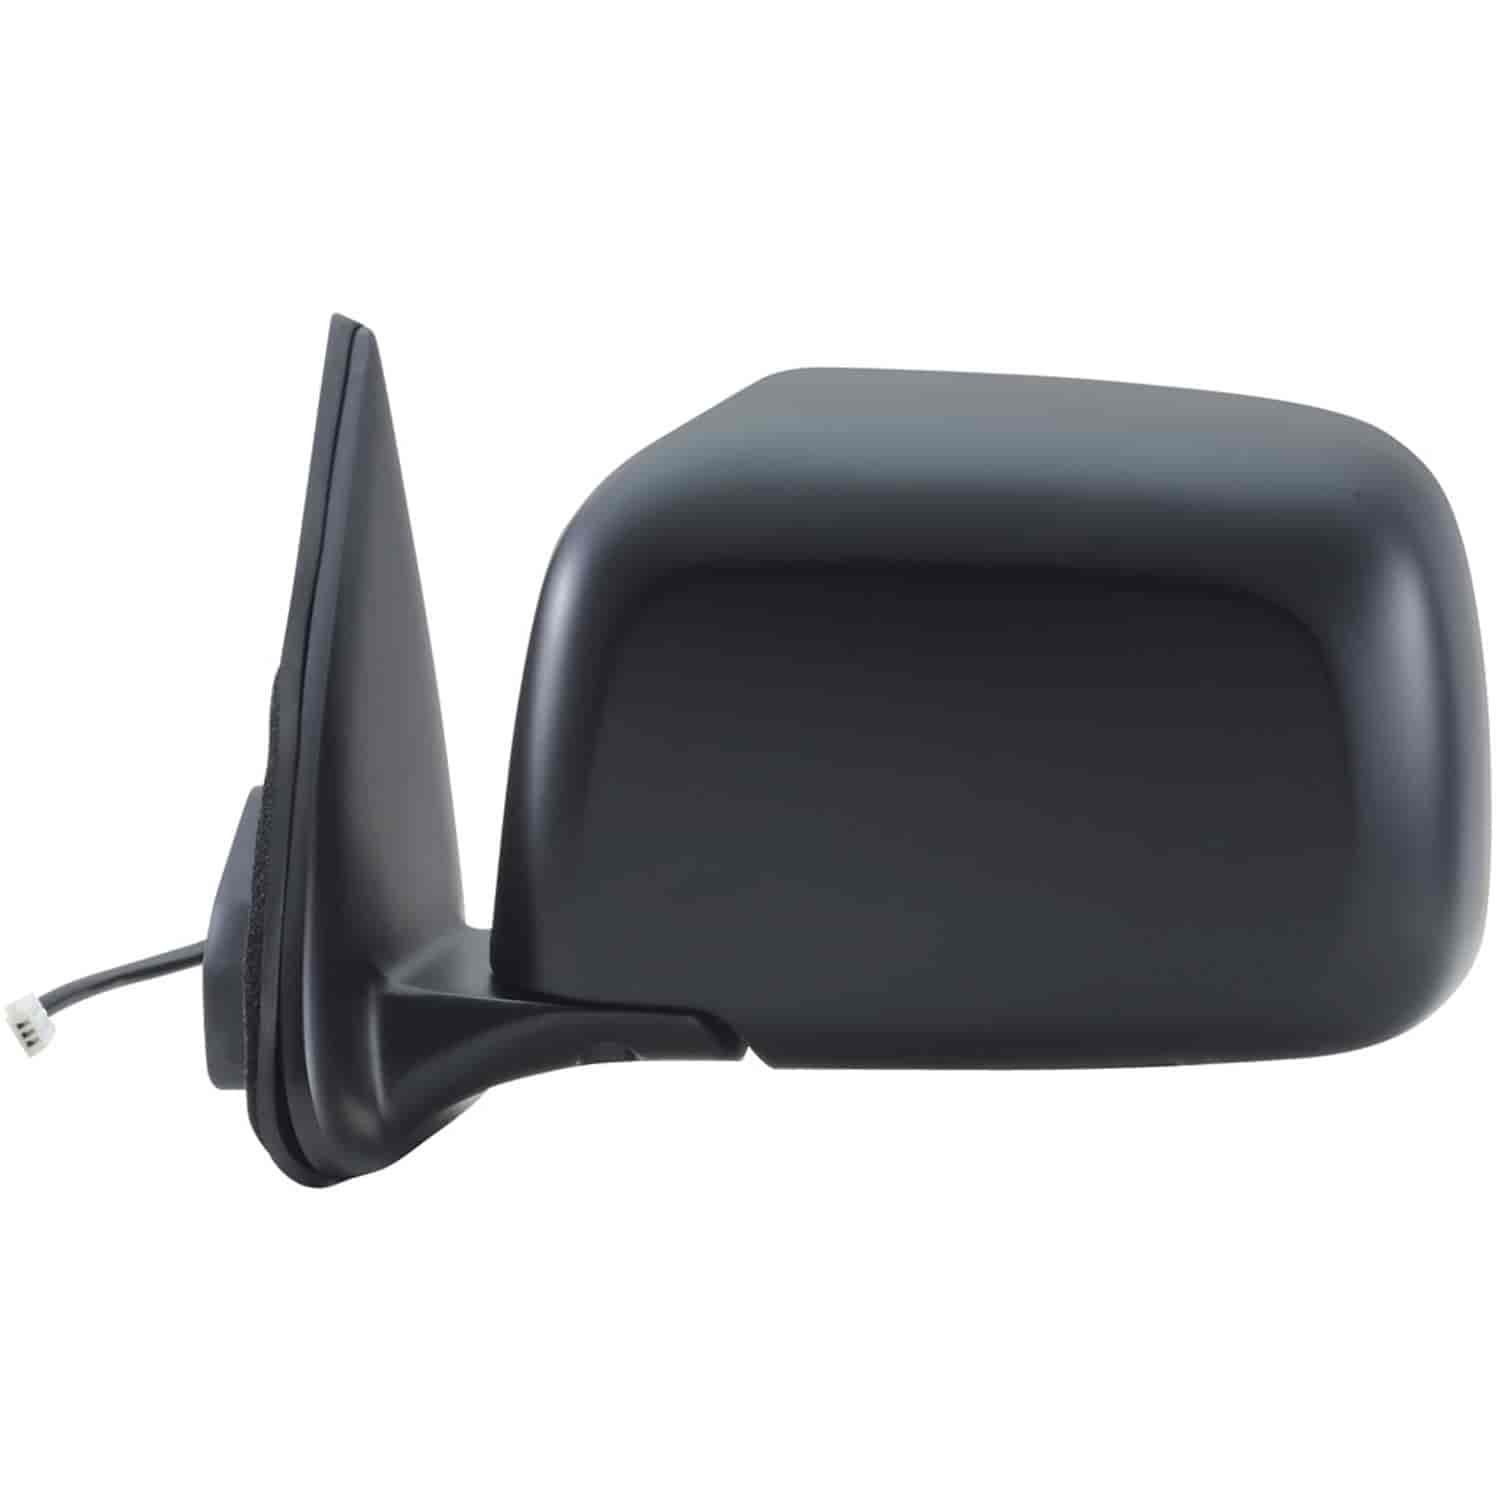 OEM Style Replacement mirror for 97-98 Toyota 4 Runner driver side mirror tested to fit and function